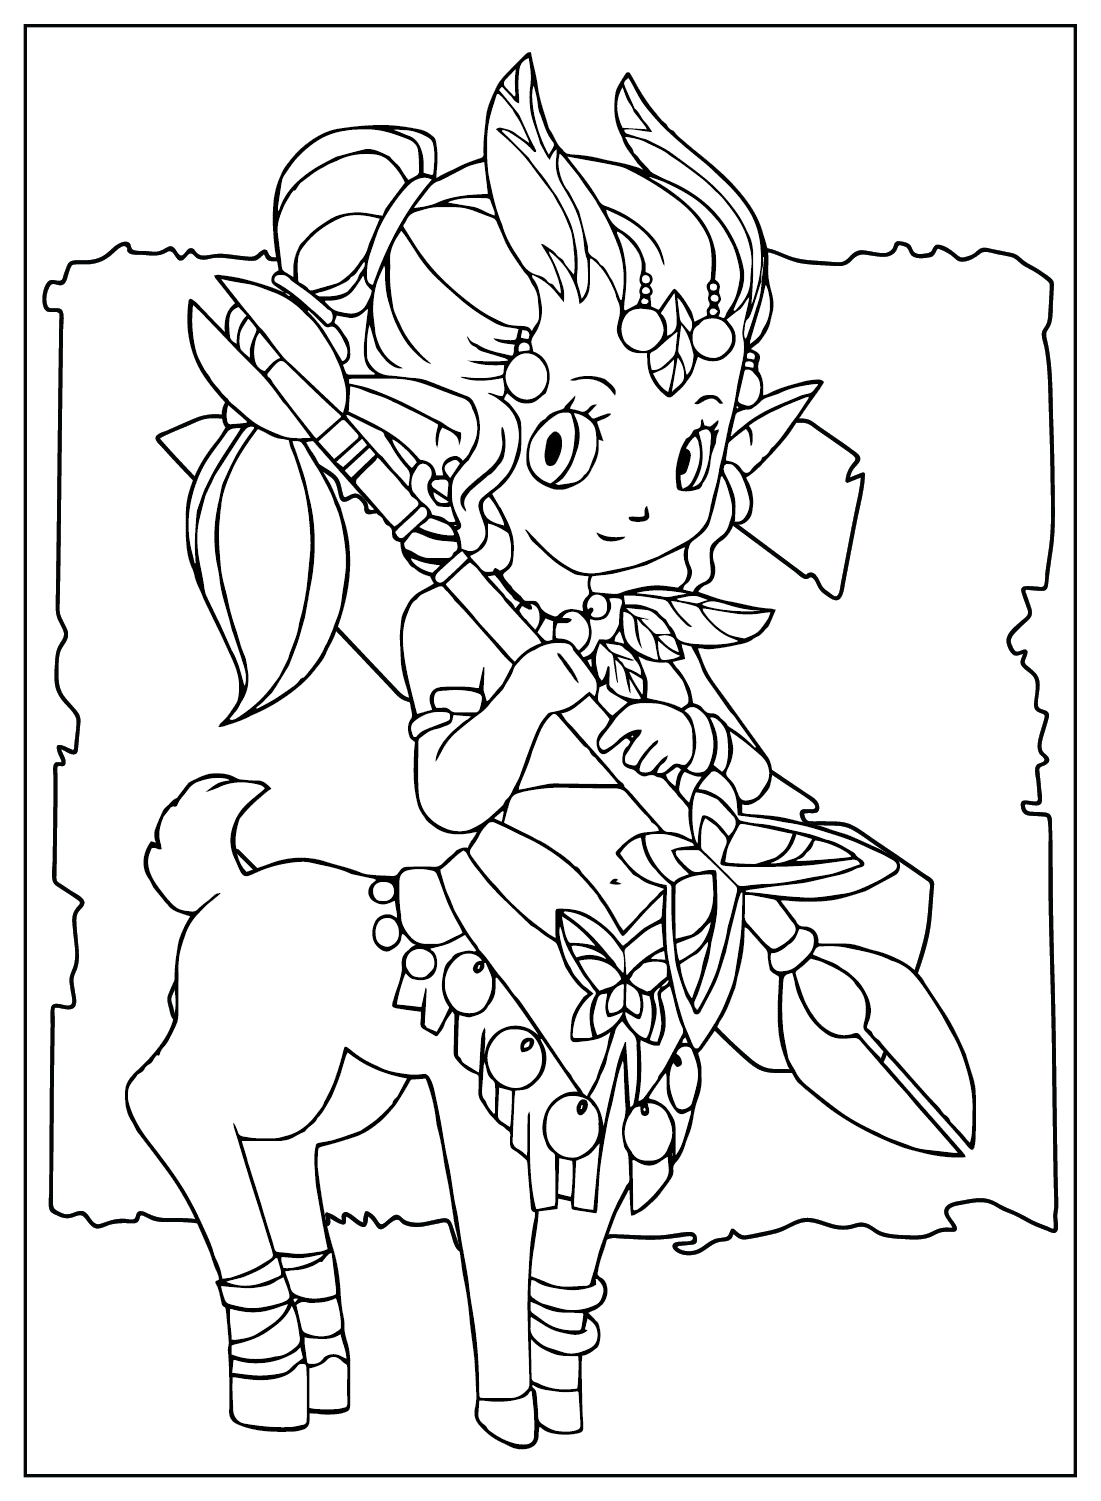 Enchantress Coloring Page from Dota 2